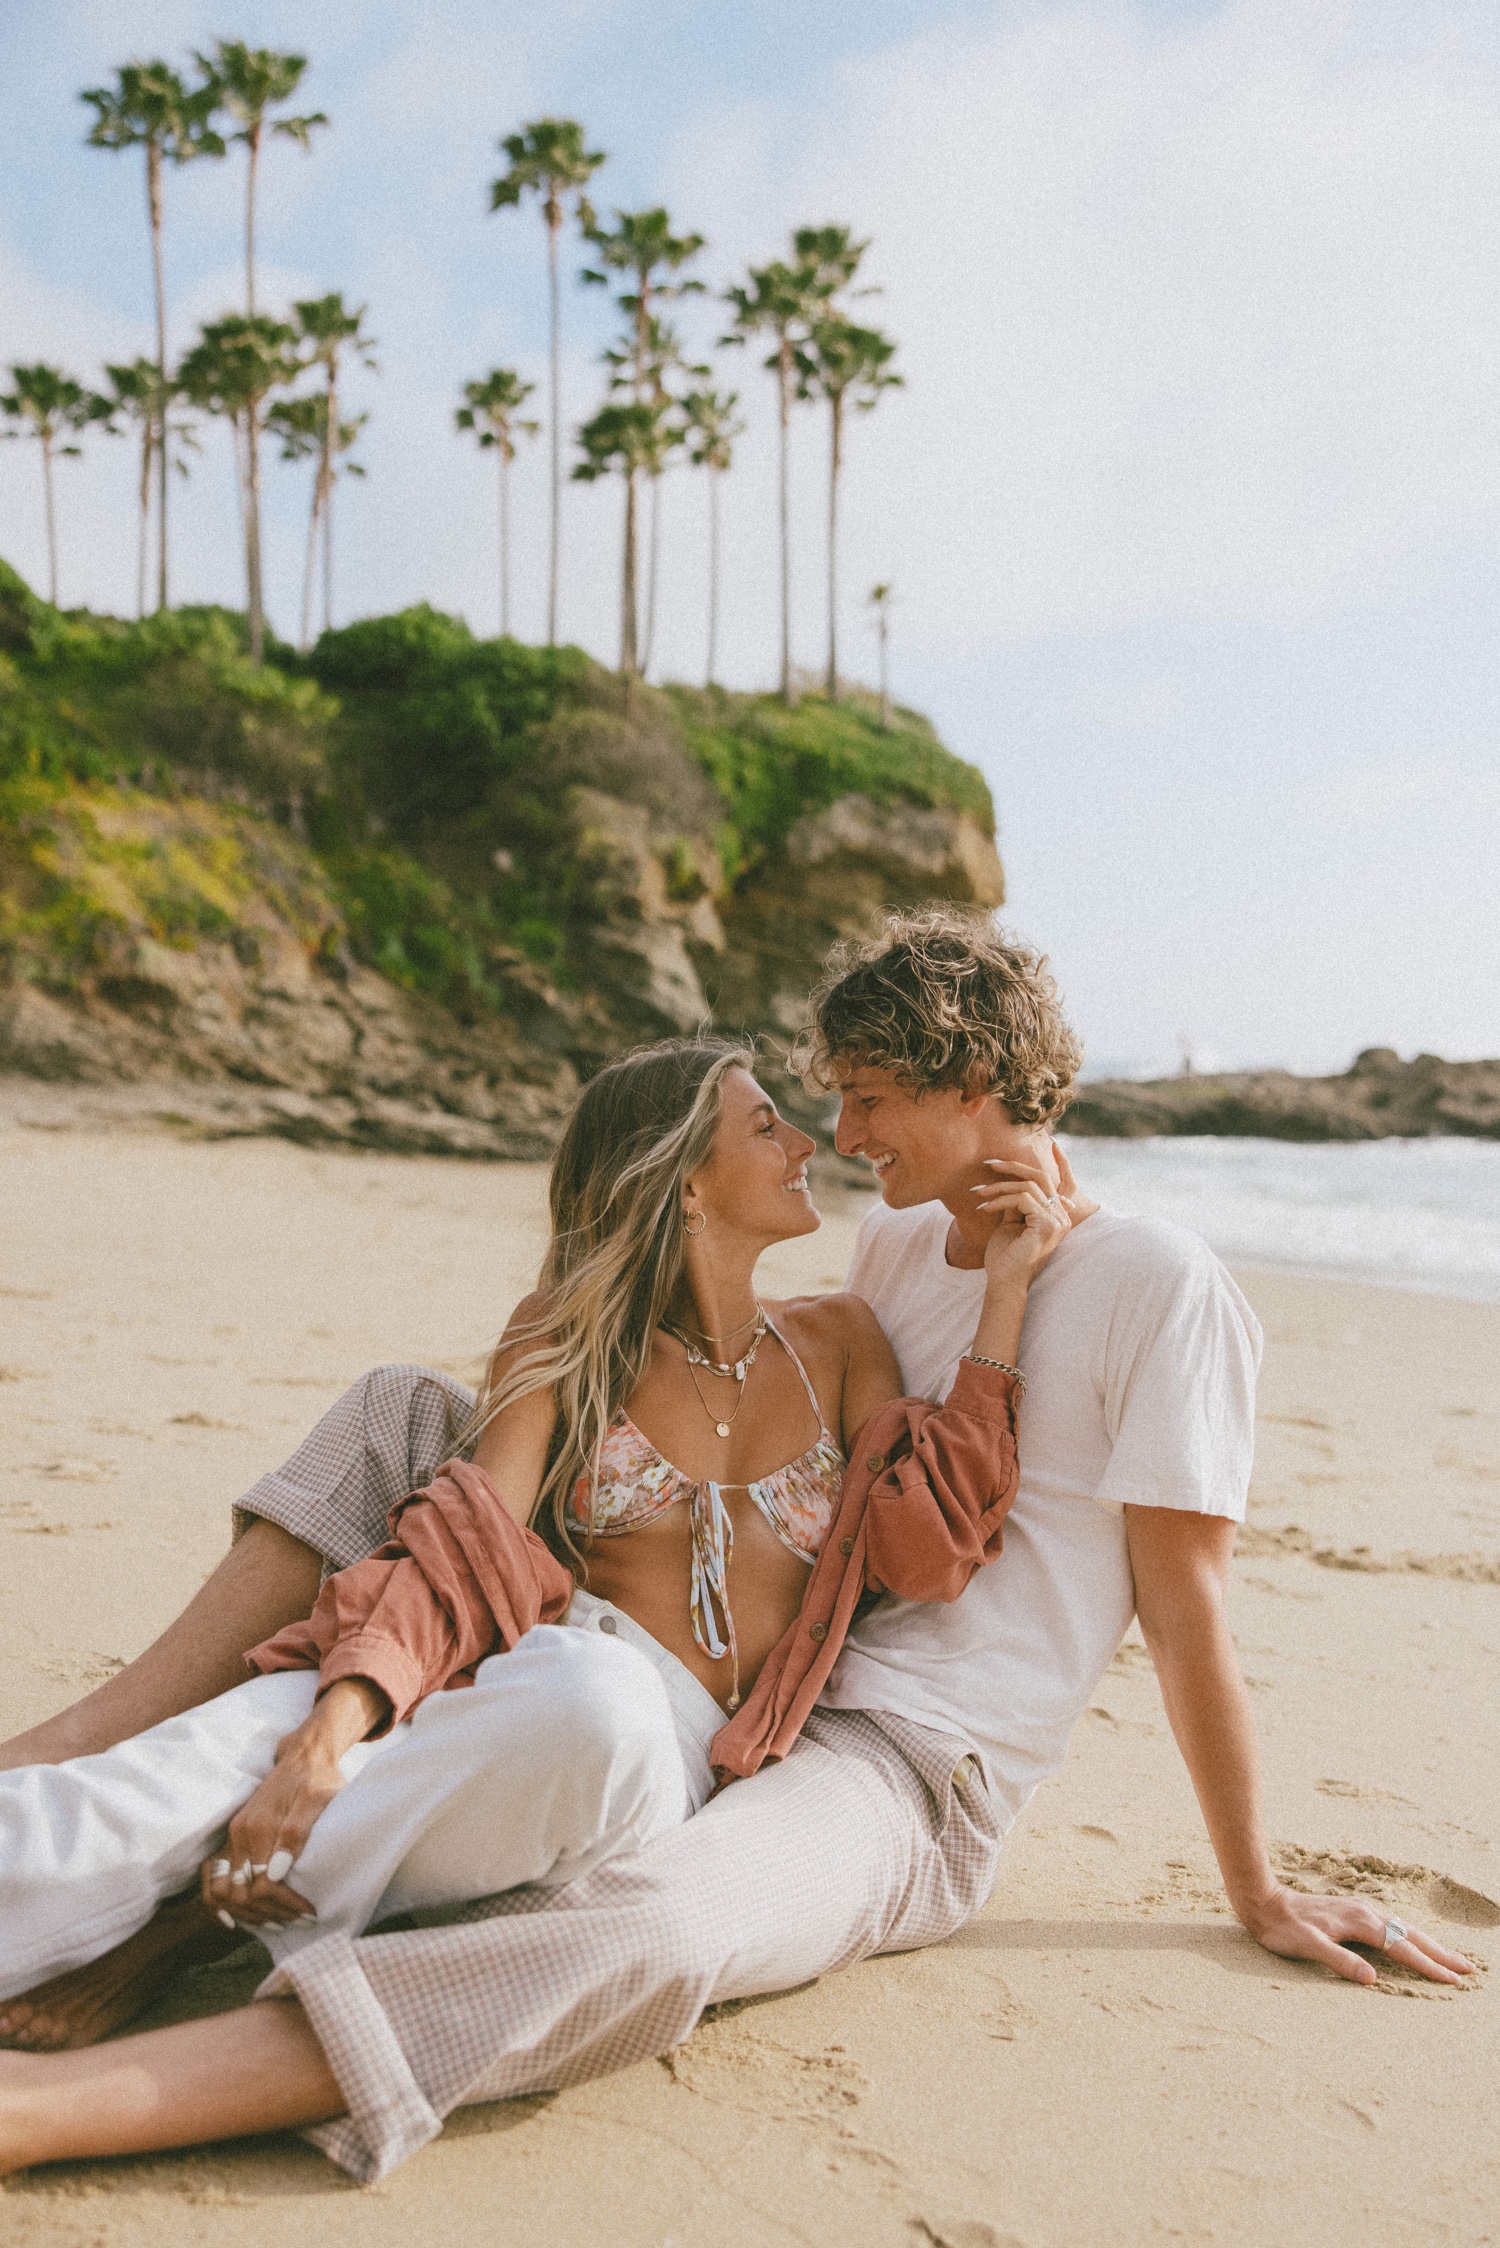 EASY COUPLE'S POSE INSPO 👩🏼‍❤️‍💋‍👨🏻 | Gallery posted by Cass Spinelli  | Lemon8